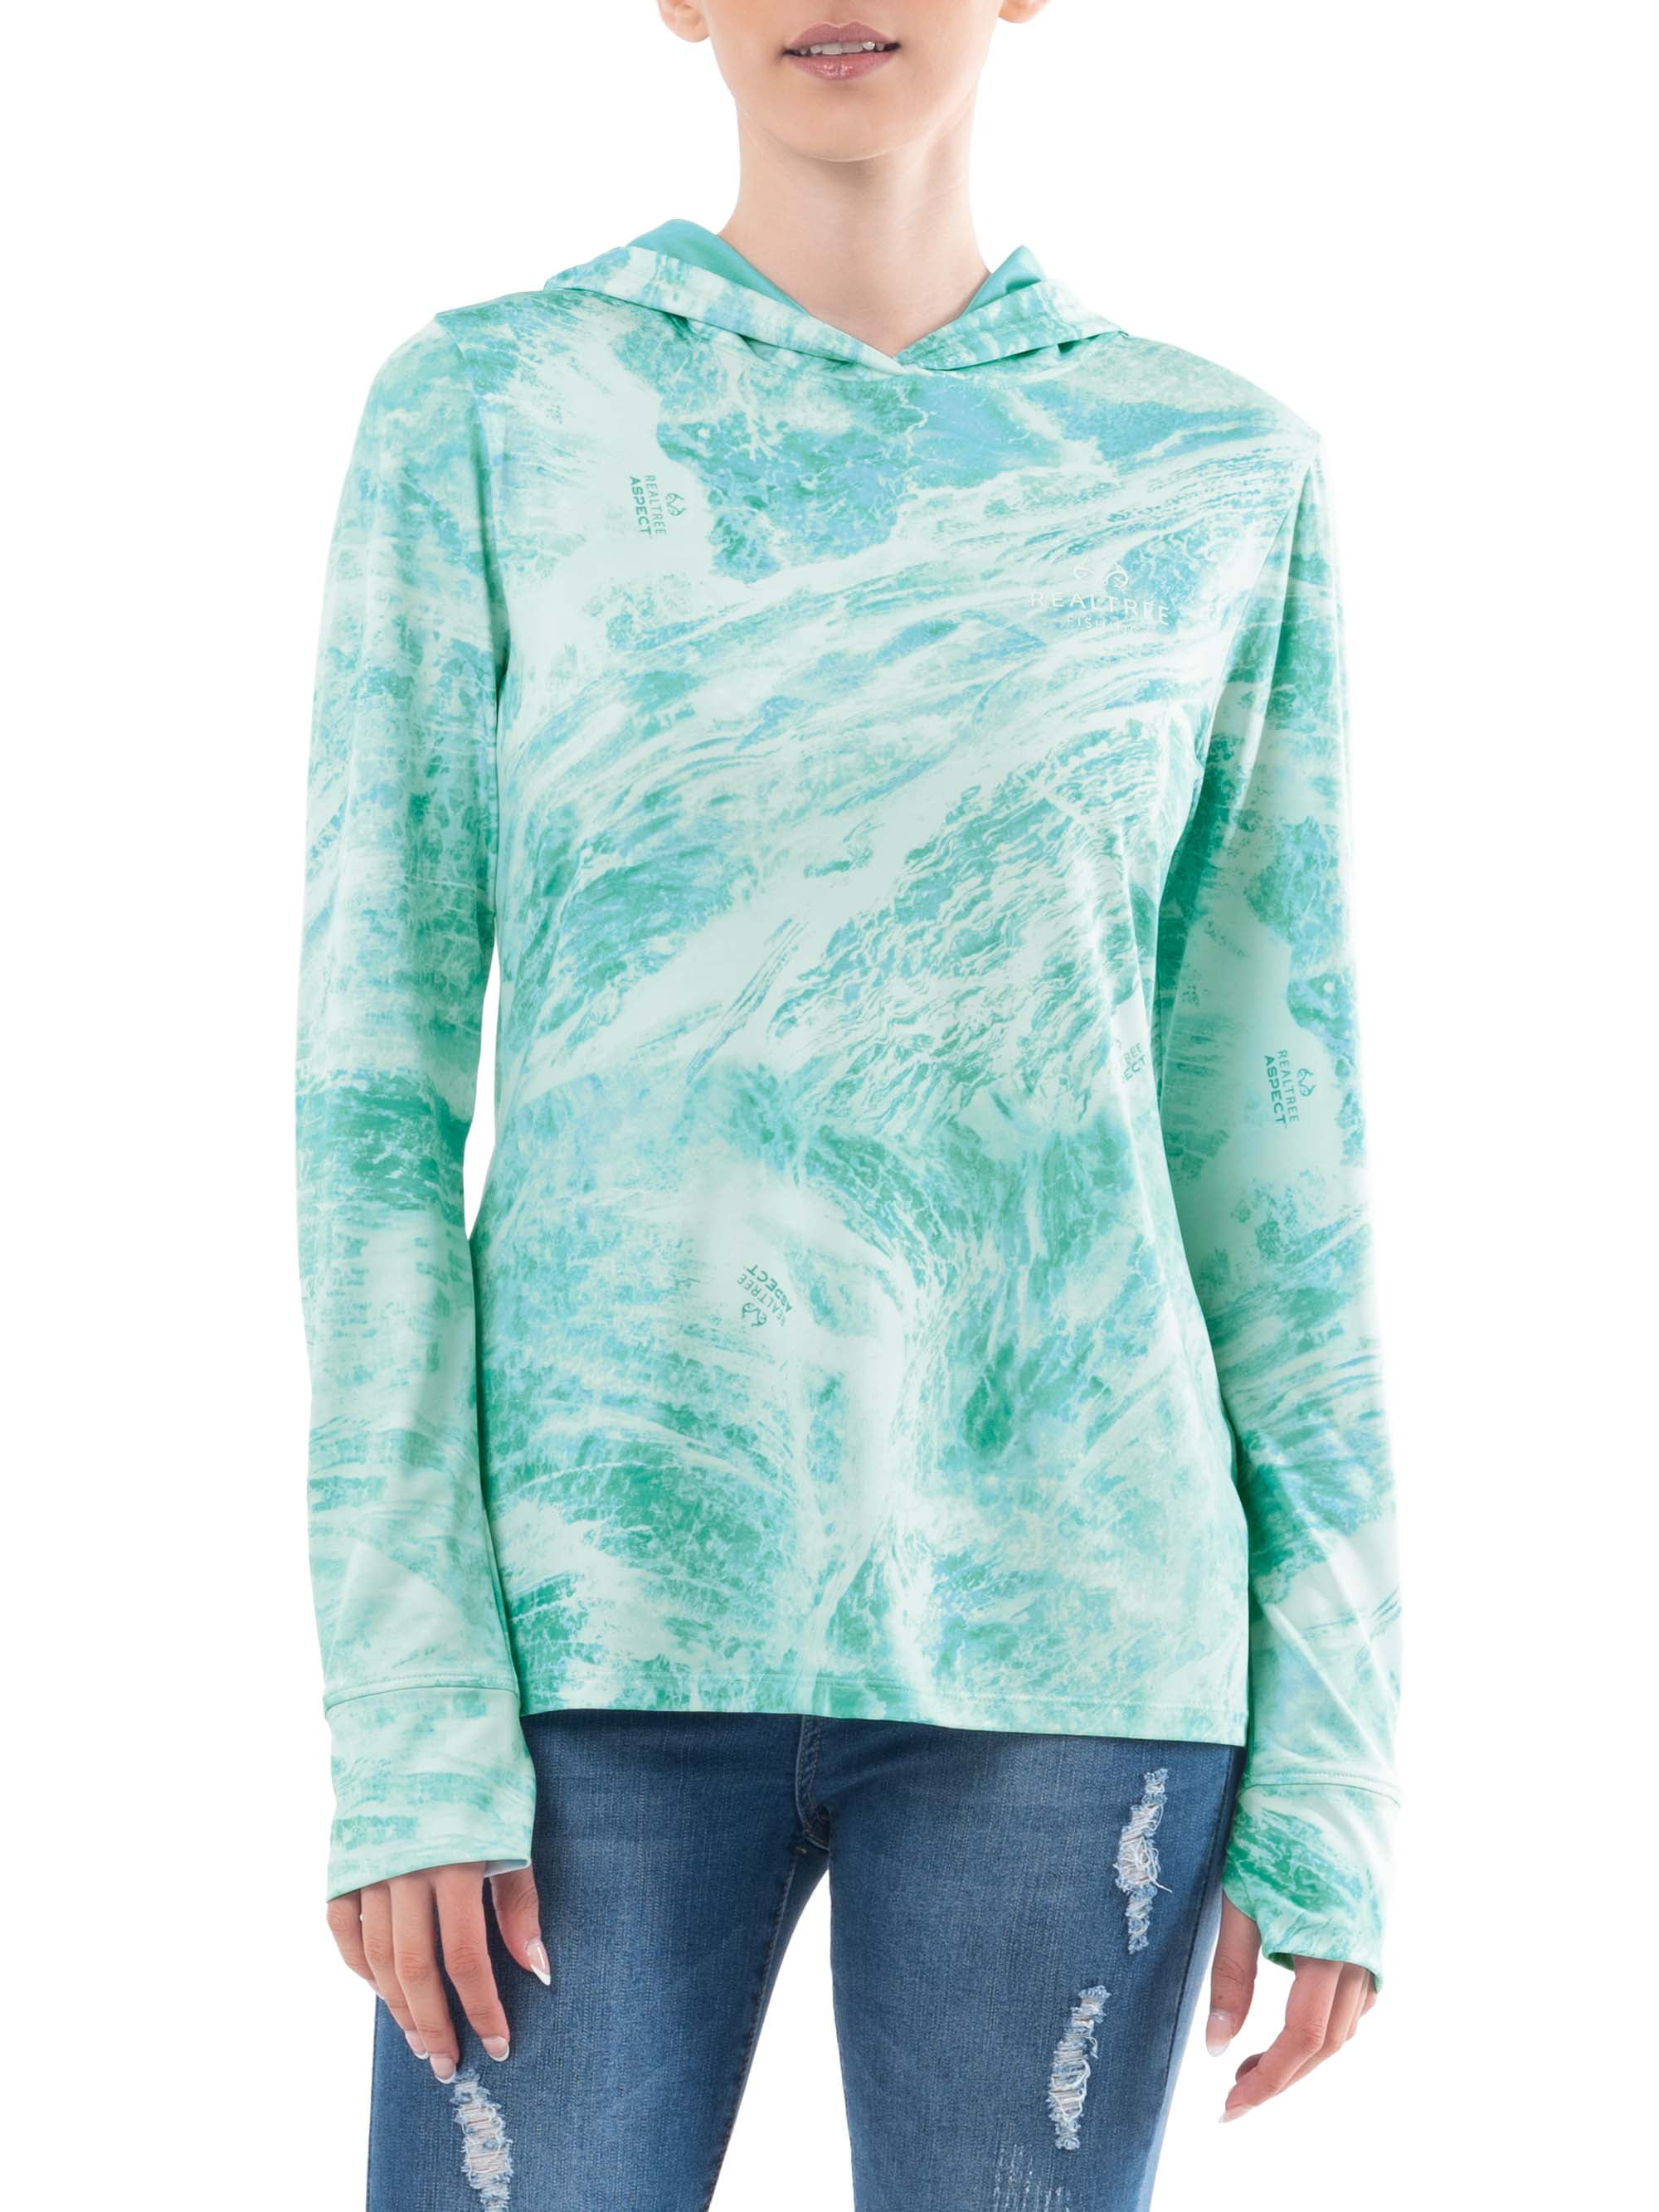 Realtree Women's Fishing Performance Knit Hoodie, Size: Large, Blue